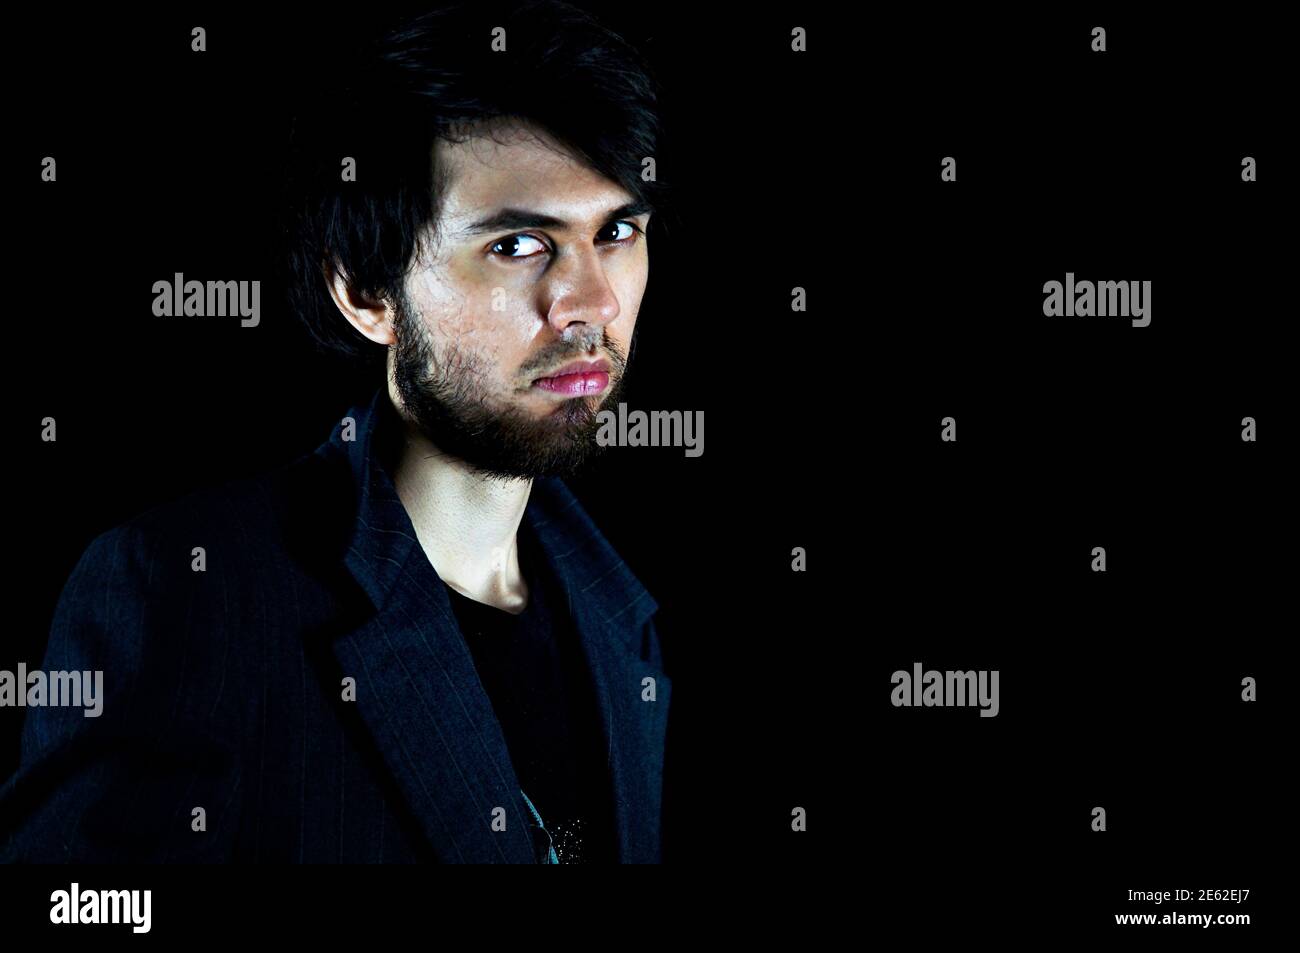 Man looking at the camera with a serious expression, wearing a suit on a black background Stock Photo